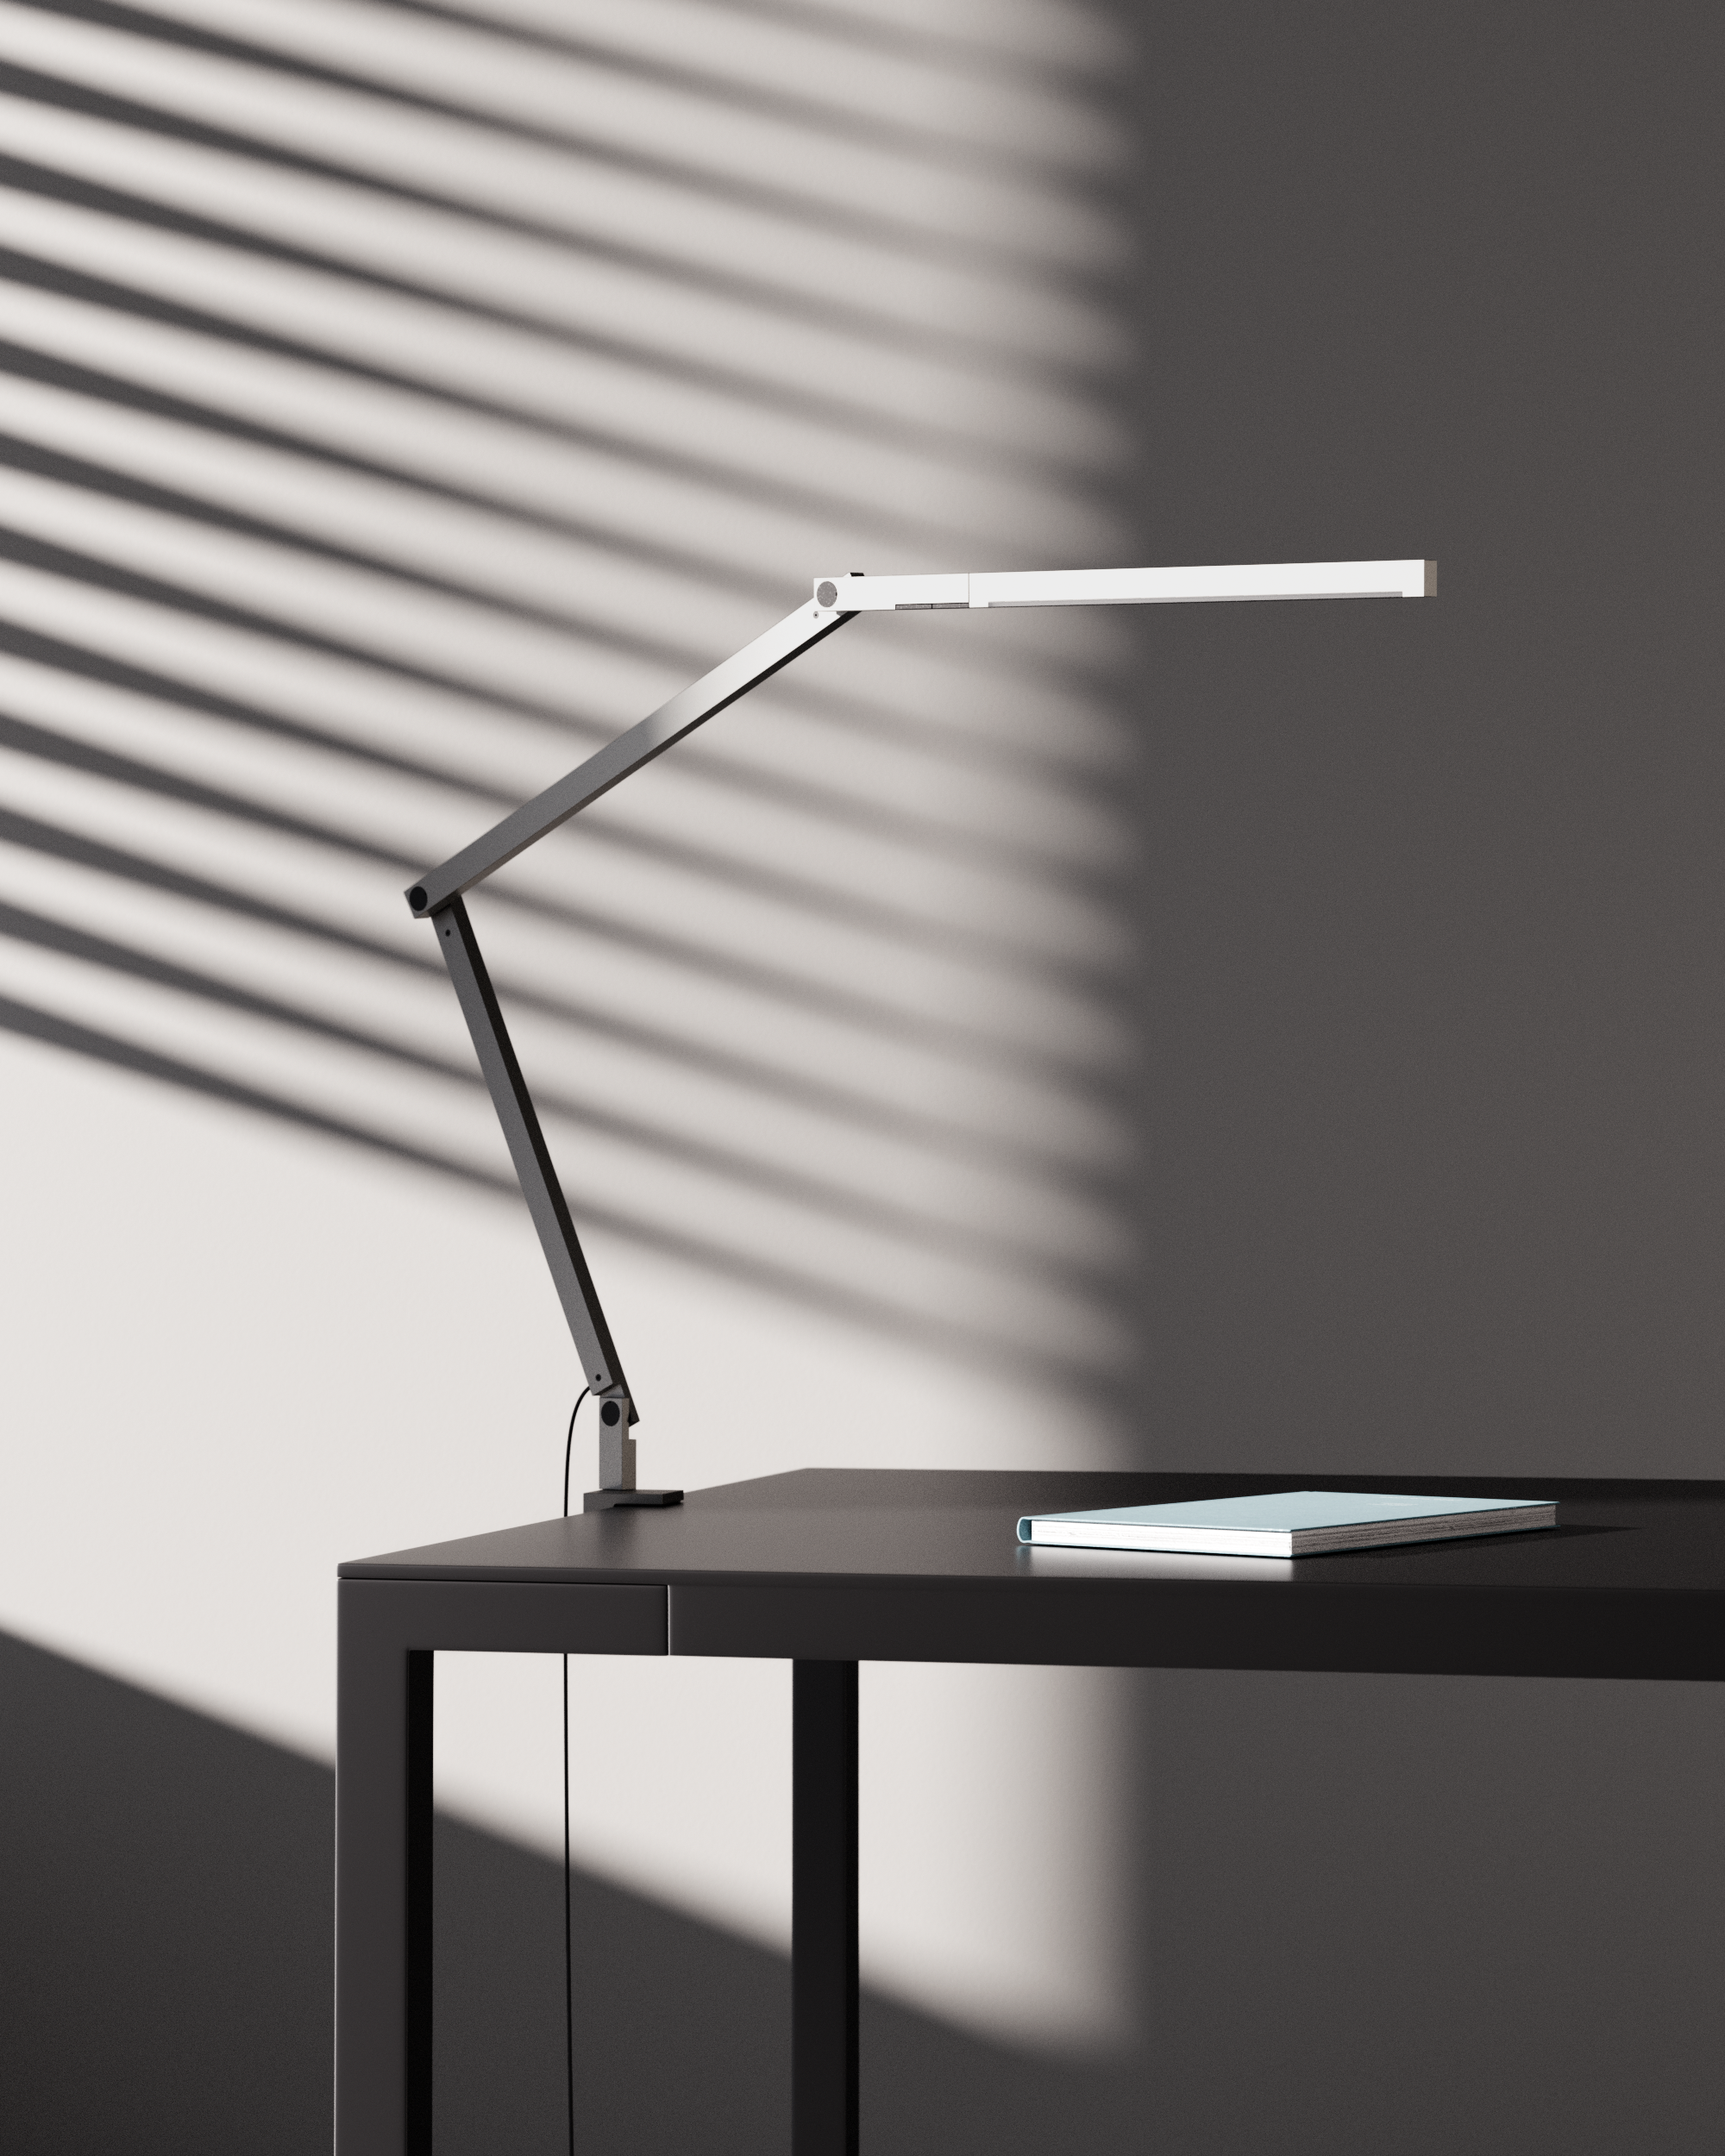 TARS Desk Lamp is a Perfect Blend of Form, Function, and Innovation